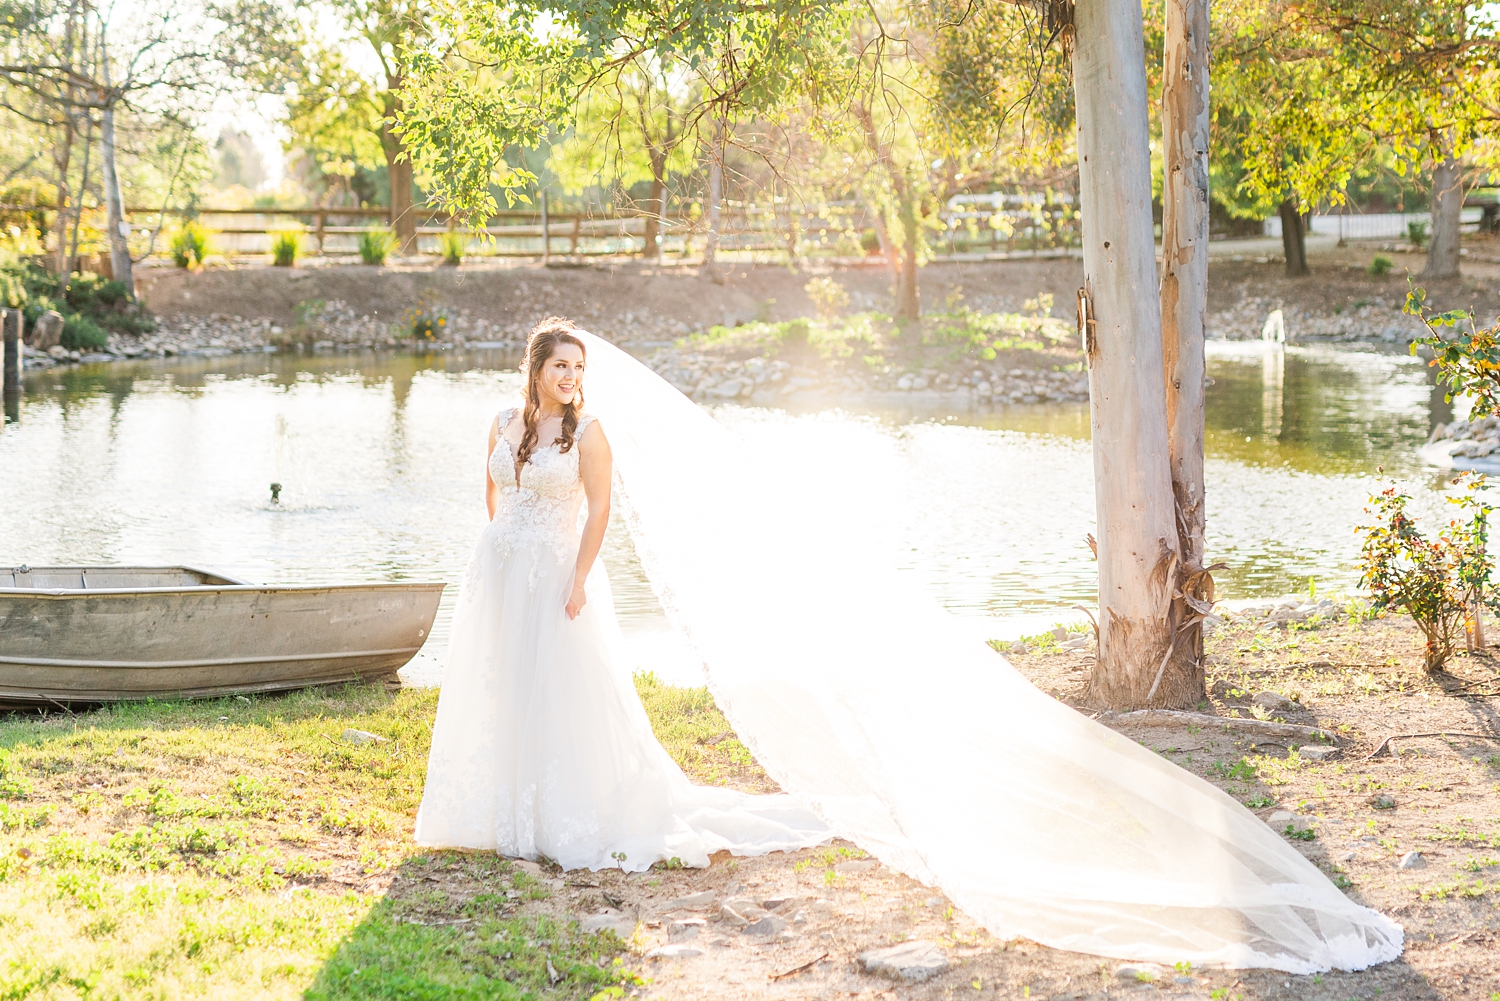 Bridal Session in a winery in temecula from a Temecula Wedding Photographer_0011.jpg